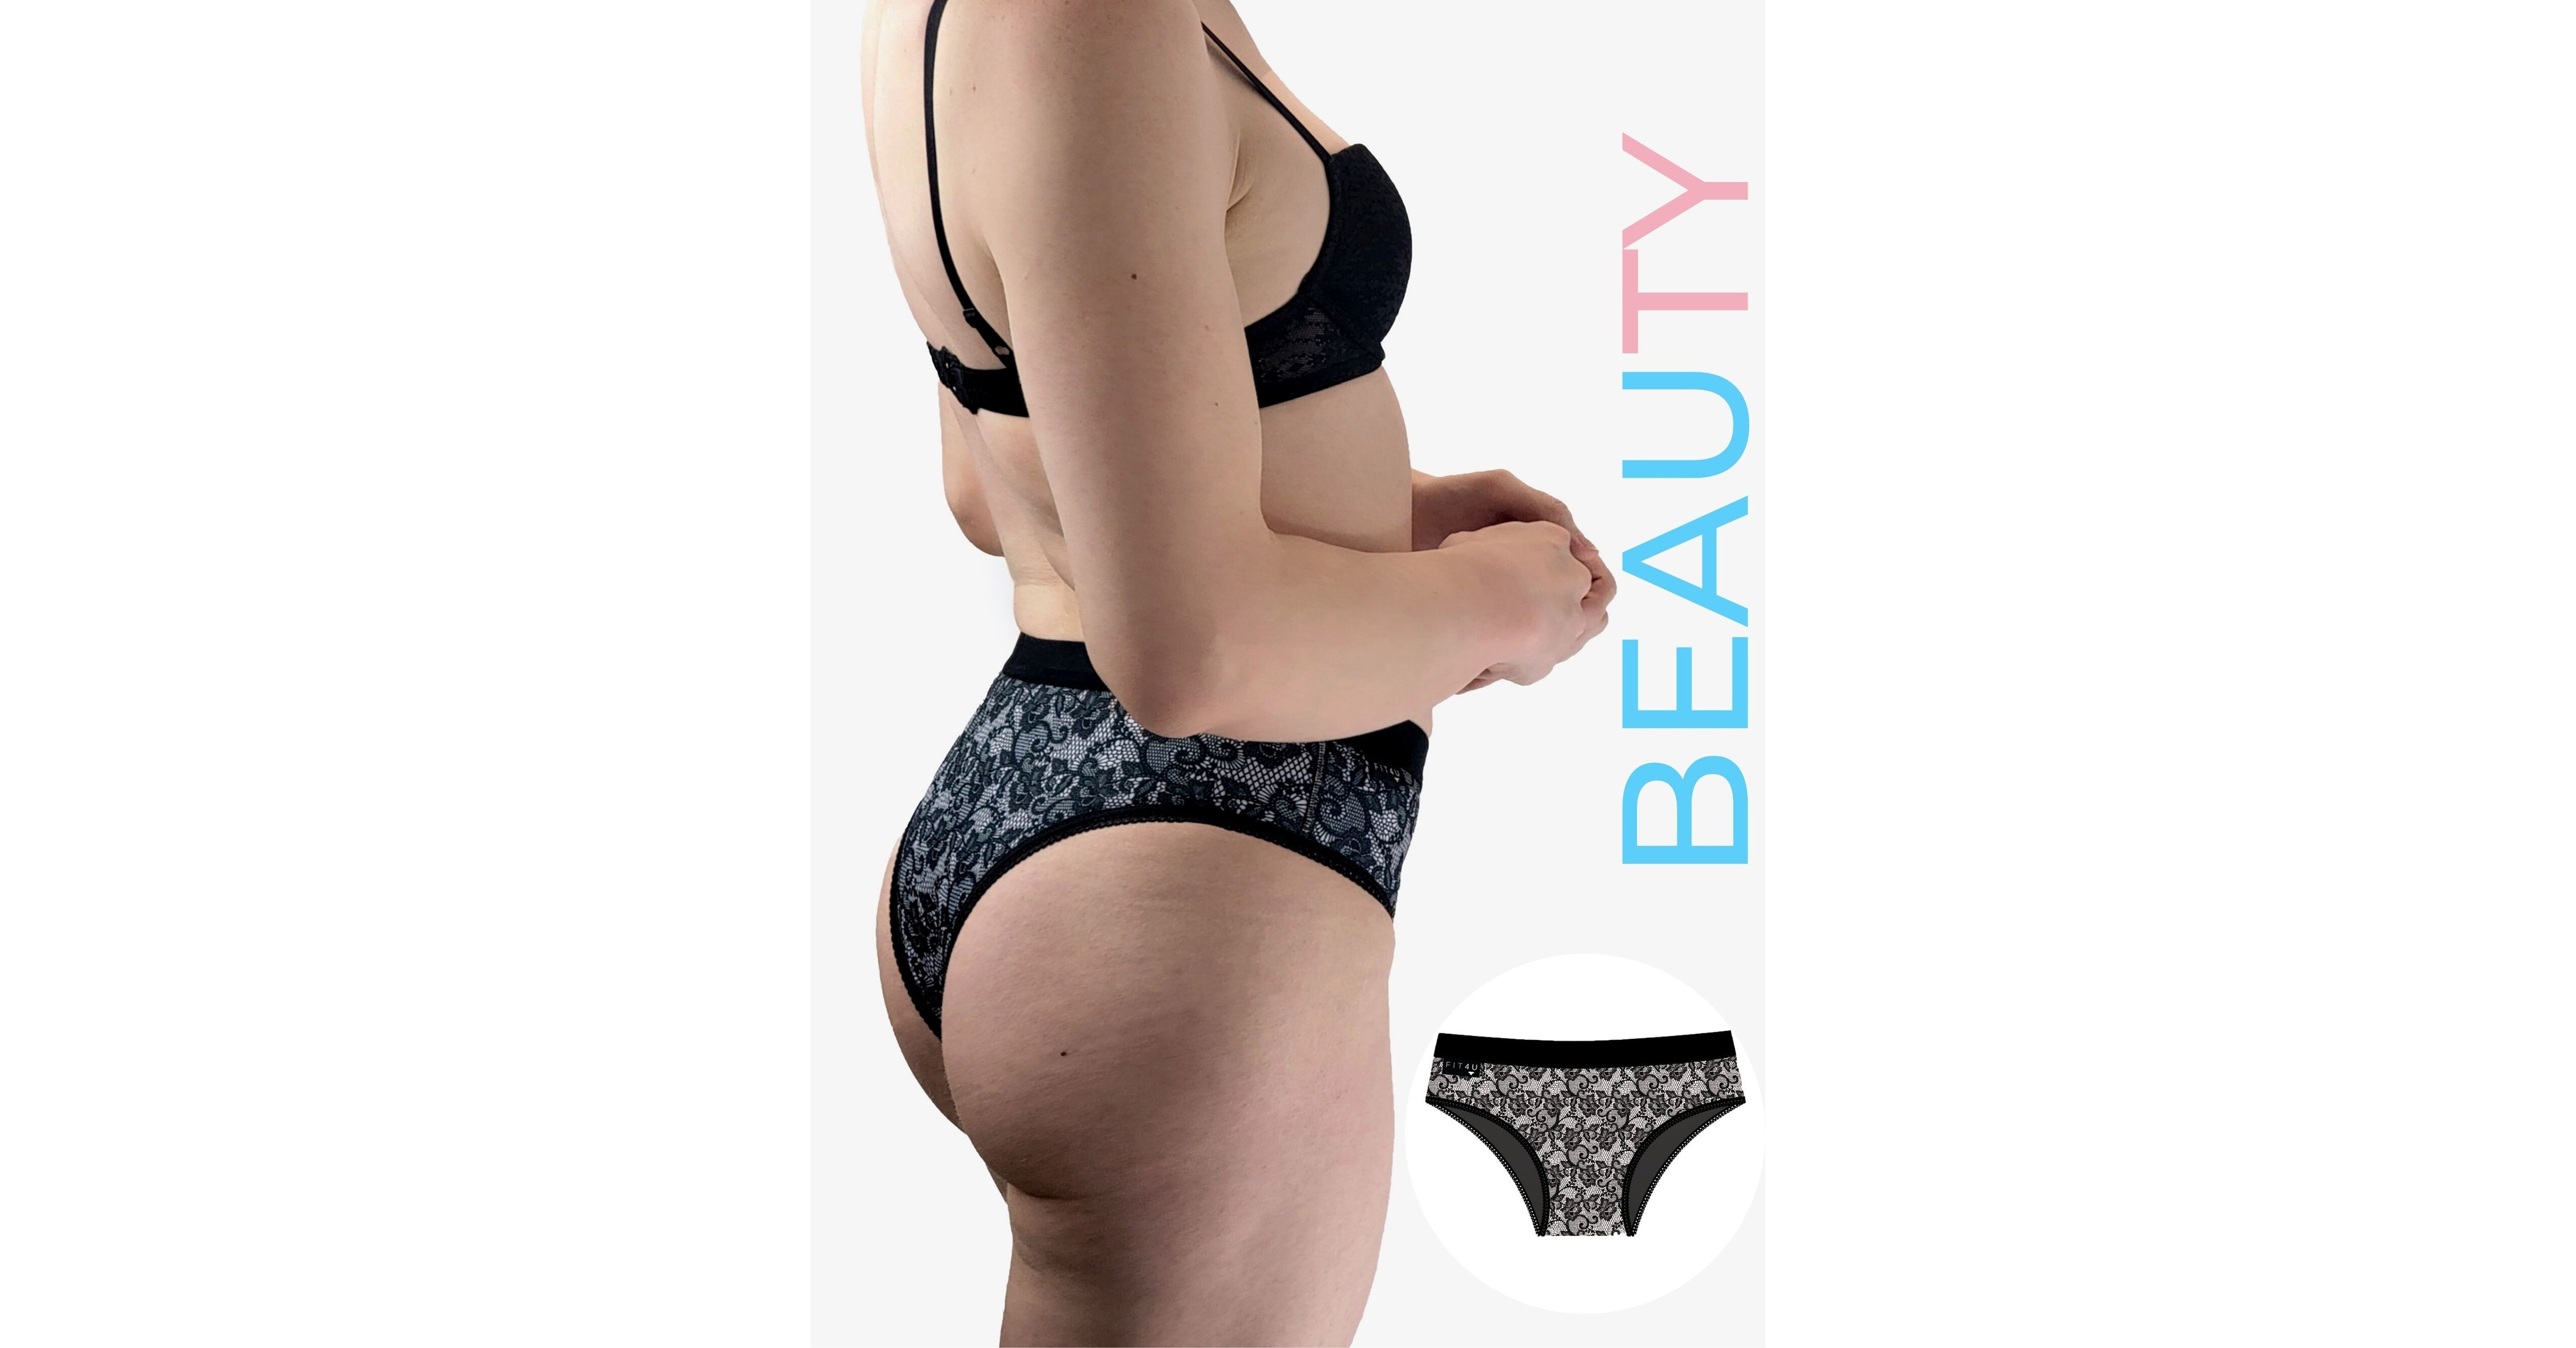 FIT4U Solutions Launches a Trans-friendly Underwear offering